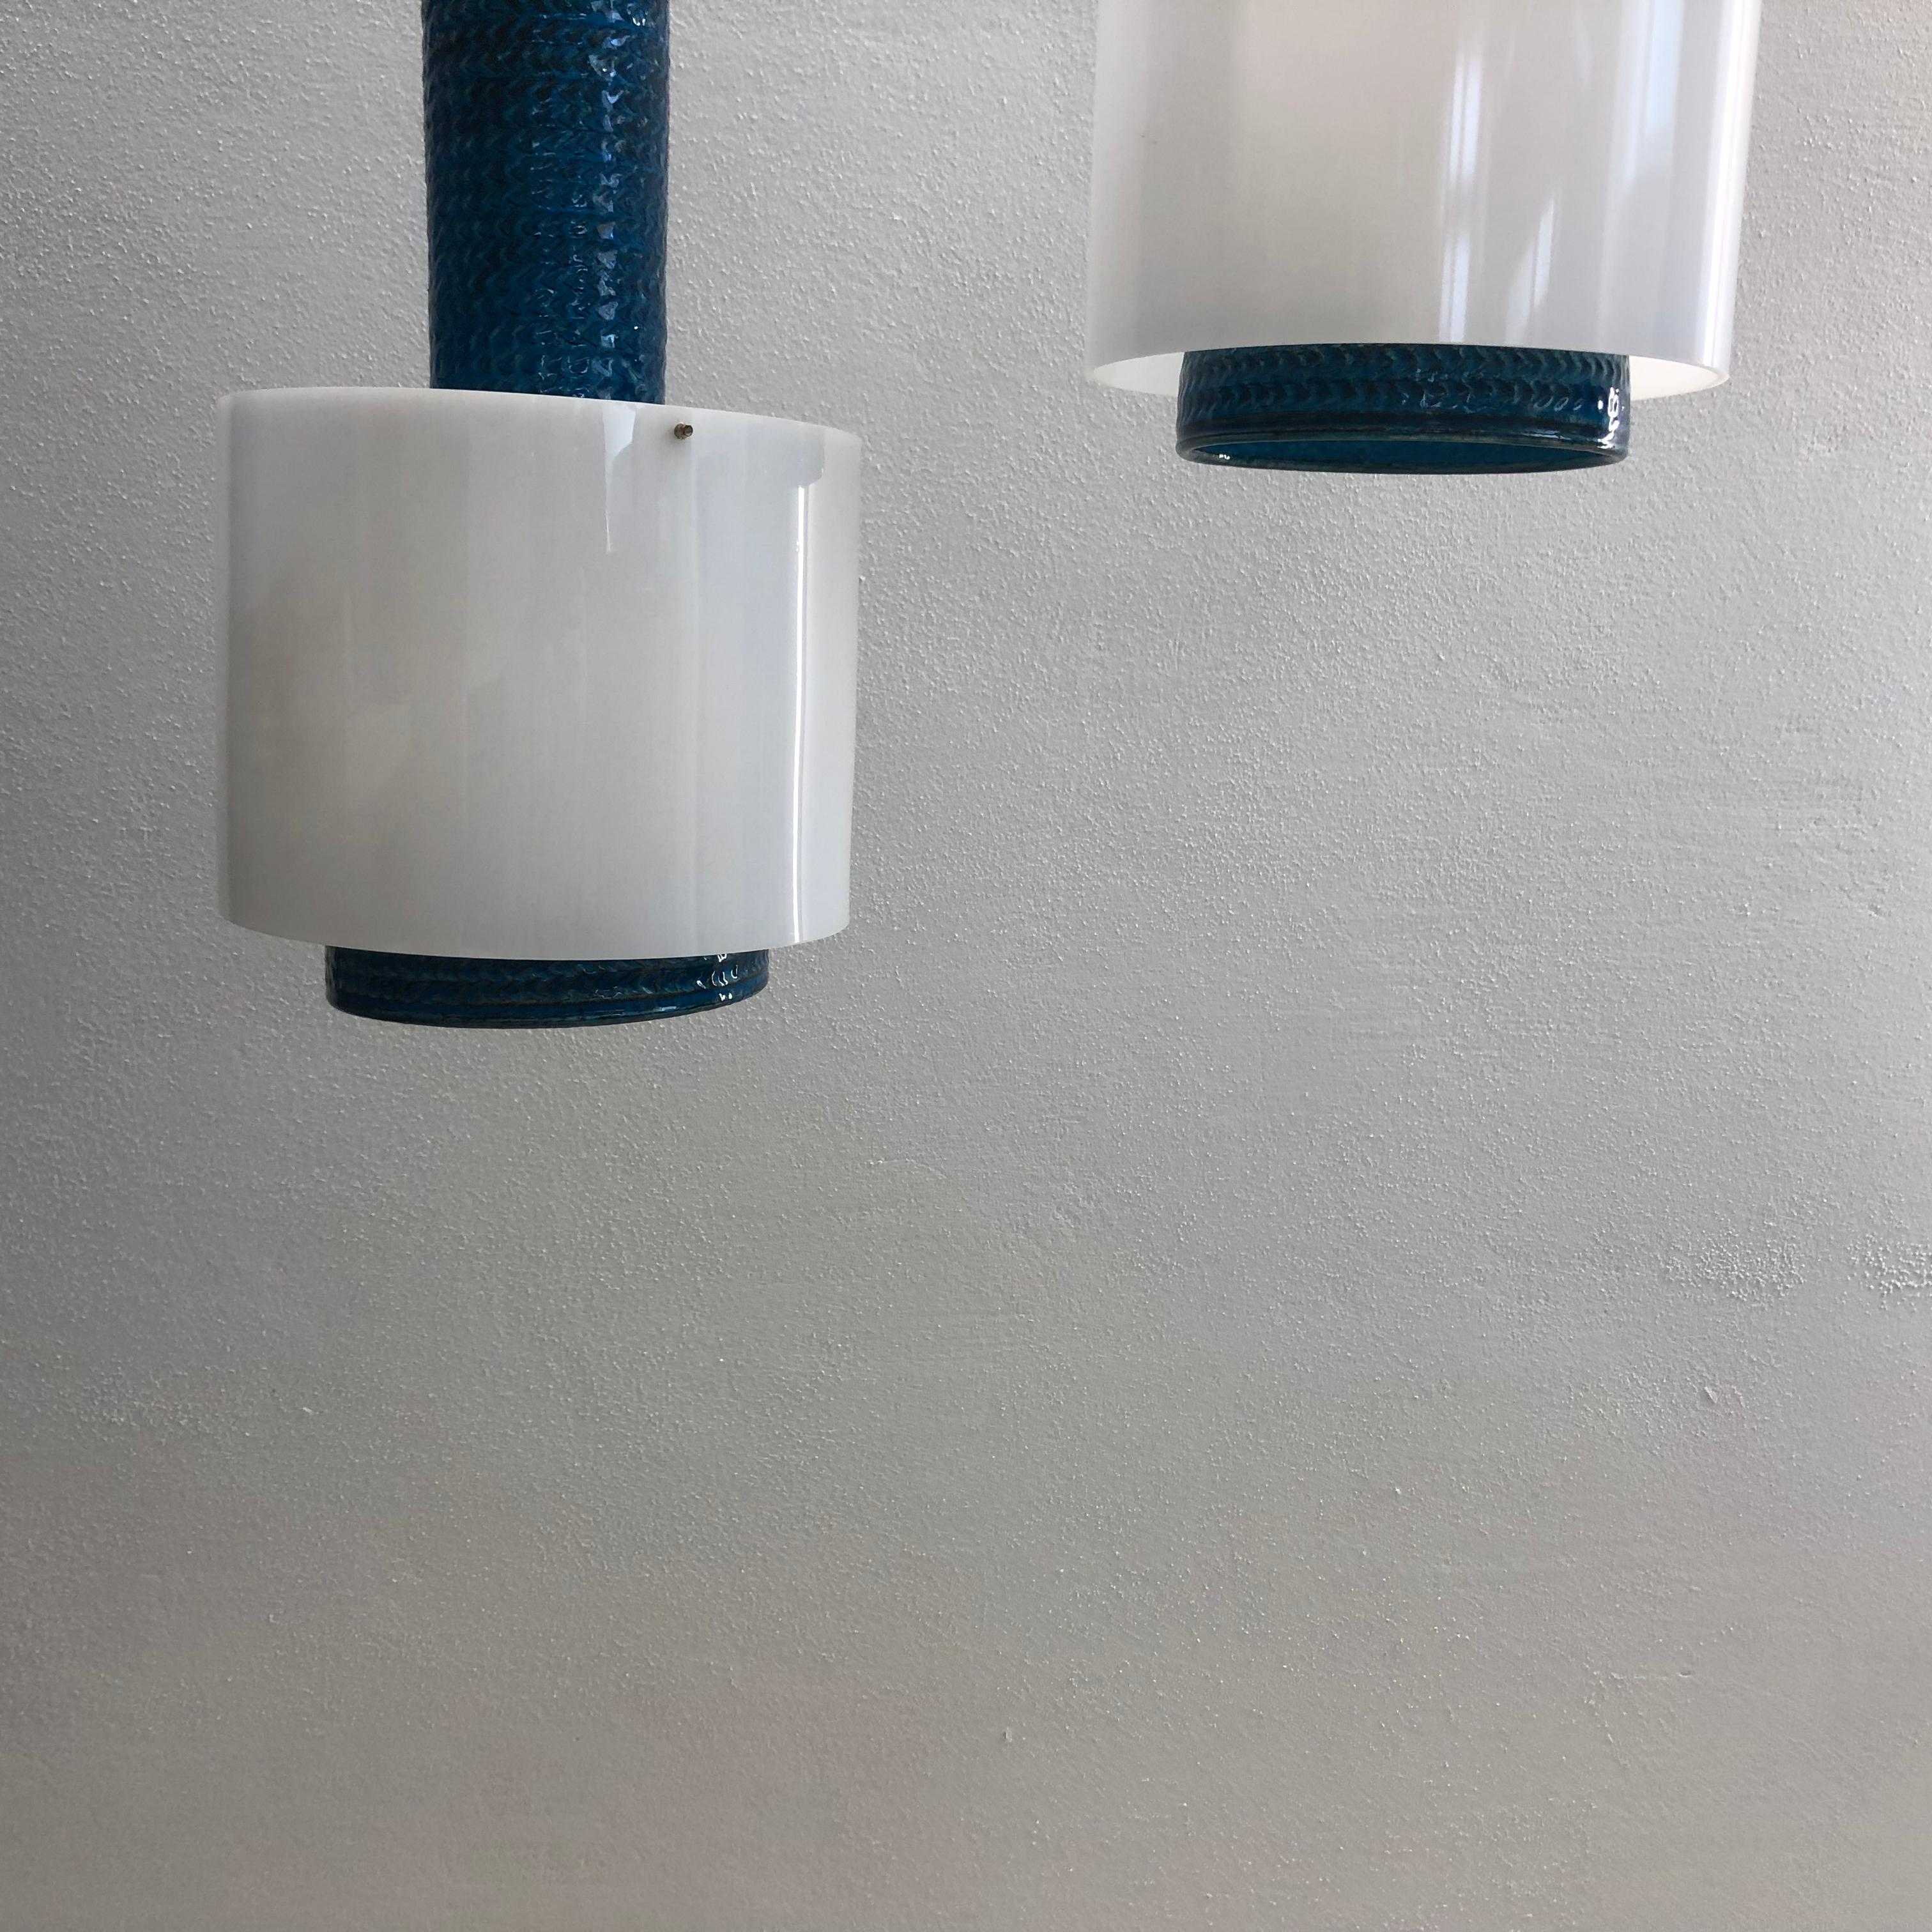 Modernist Set of Danish Kähler Lamps from the 1960s For Sale